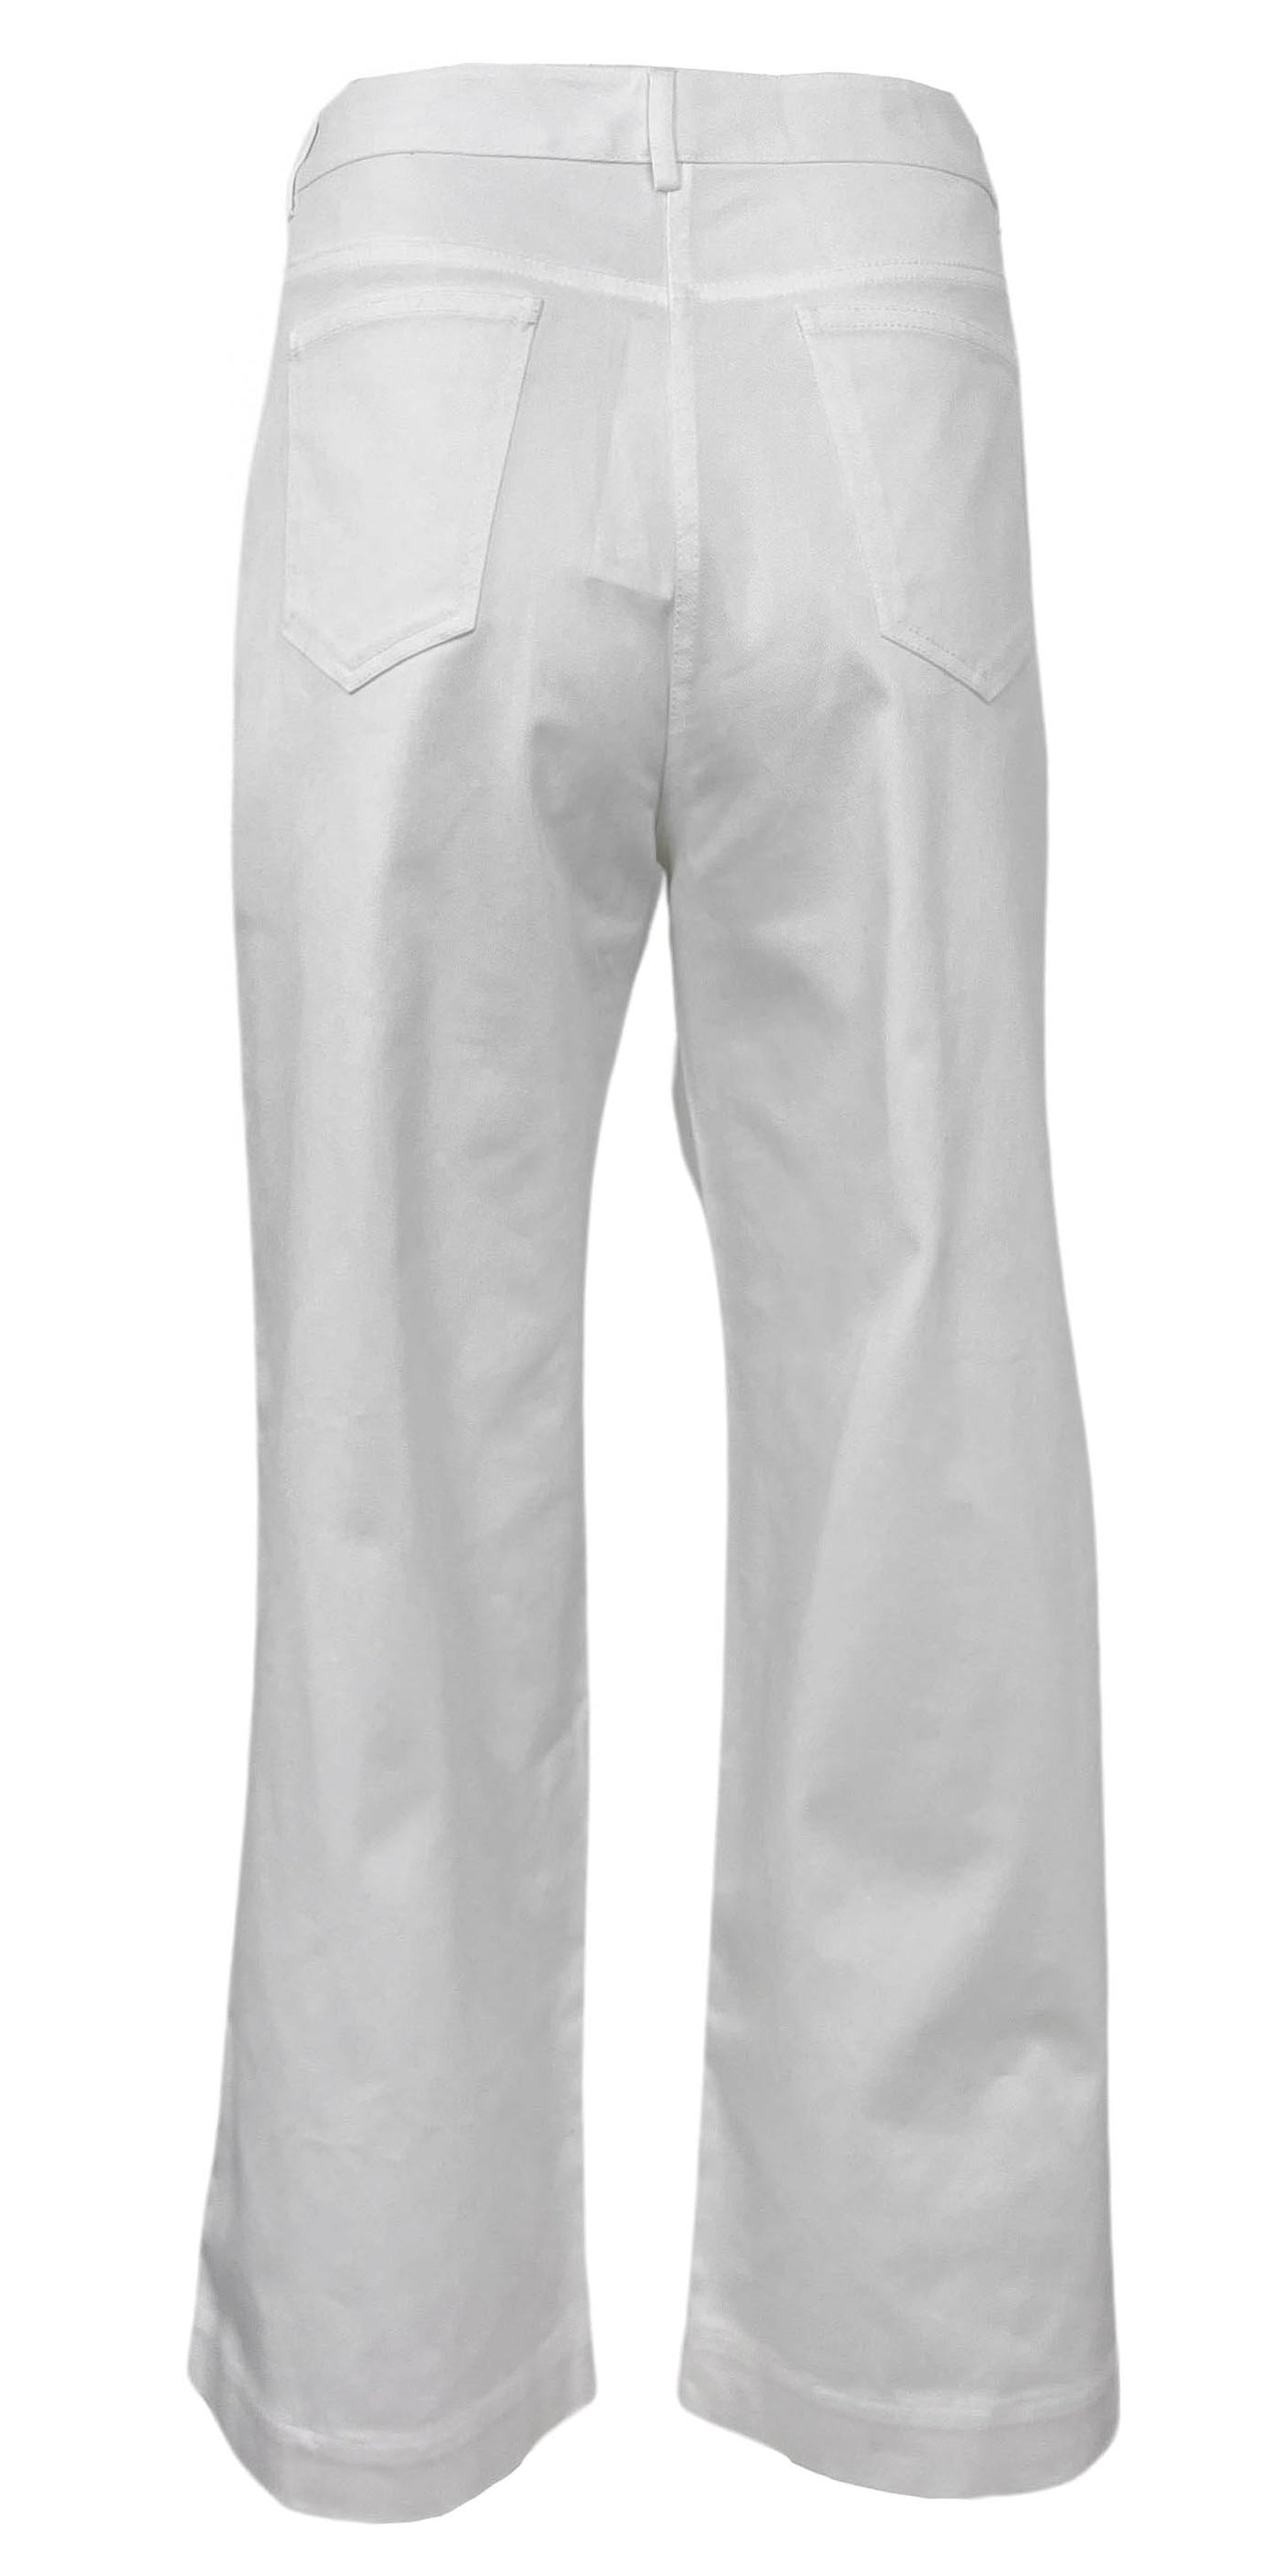 Adam Lippes Straight Leg Cropped Pant in White - Discounts on Adam Lippes at UAL